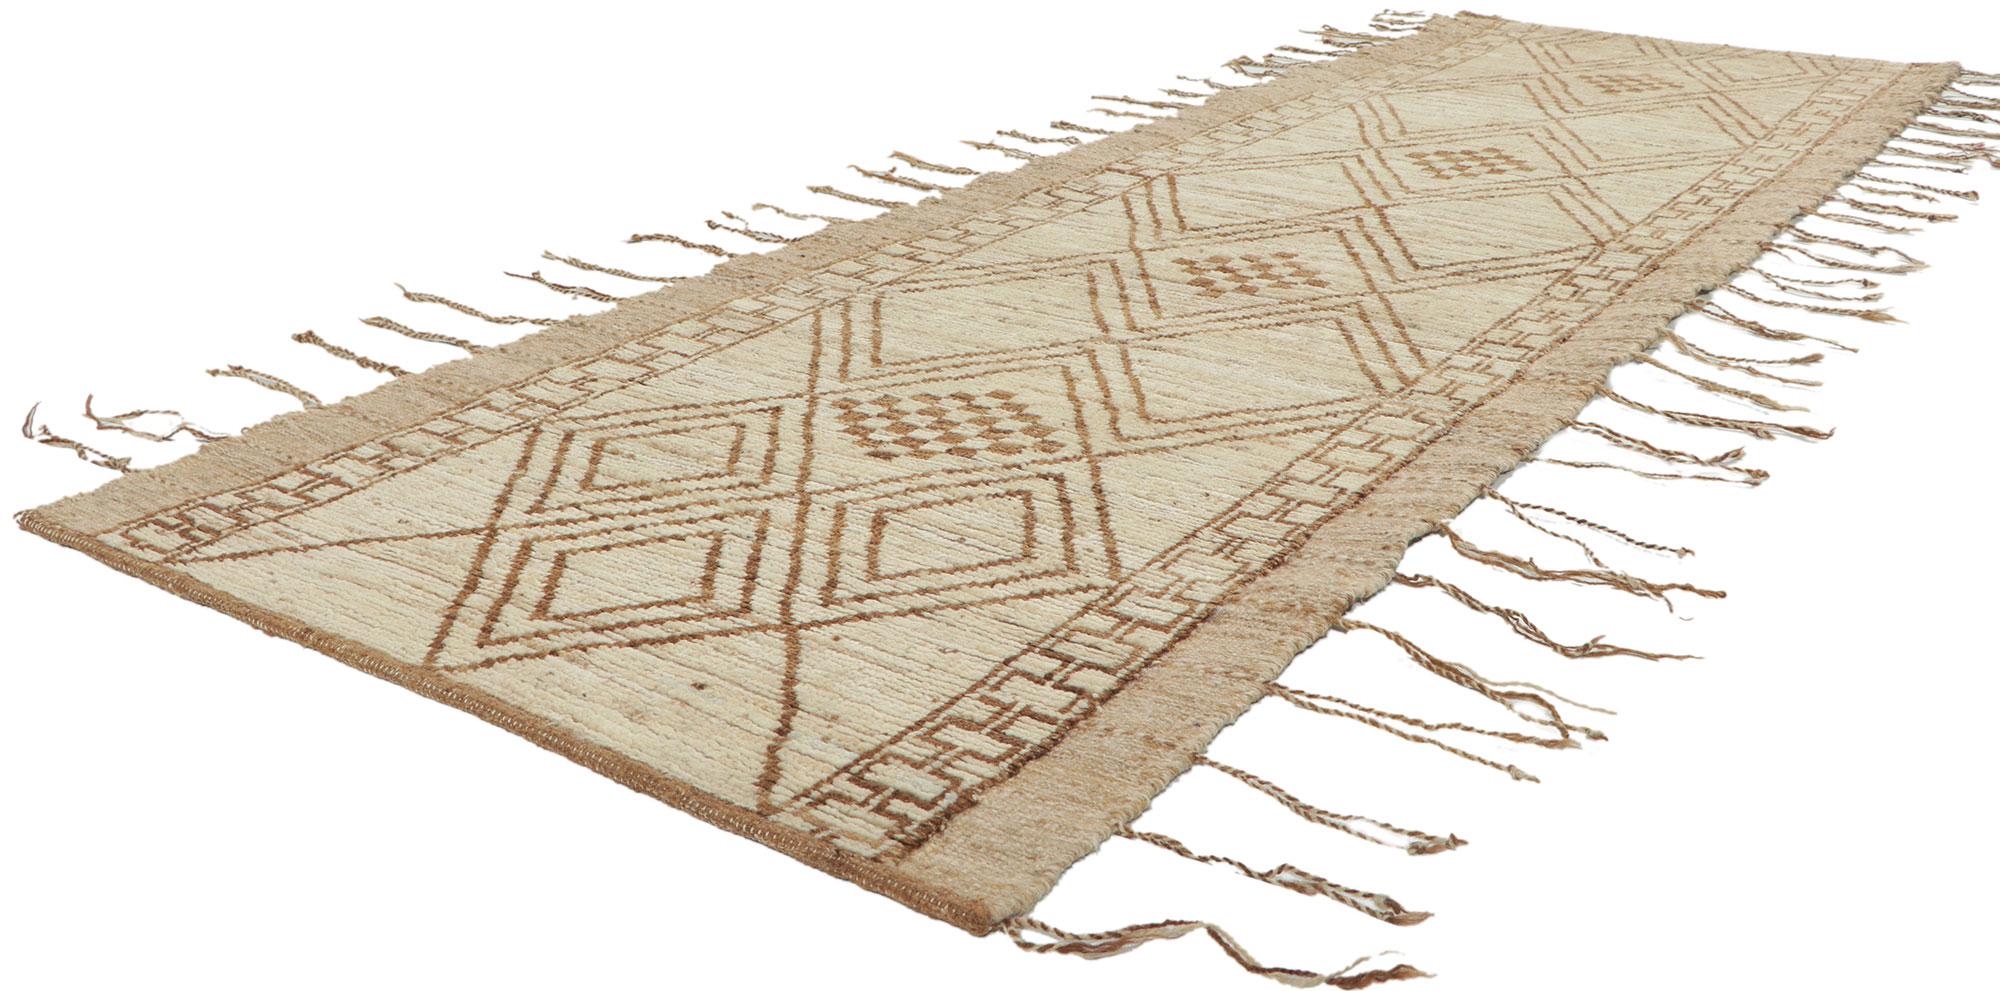 ?80761 new Contemporary Moroccan Runner with short pile, 02'10 x 09'04. With its nomadic charm, incredible detail and texture, this hand knotted wool contemporary Moroccan runner is a captivating vision of woven beauty. The tribal pattern and earthy